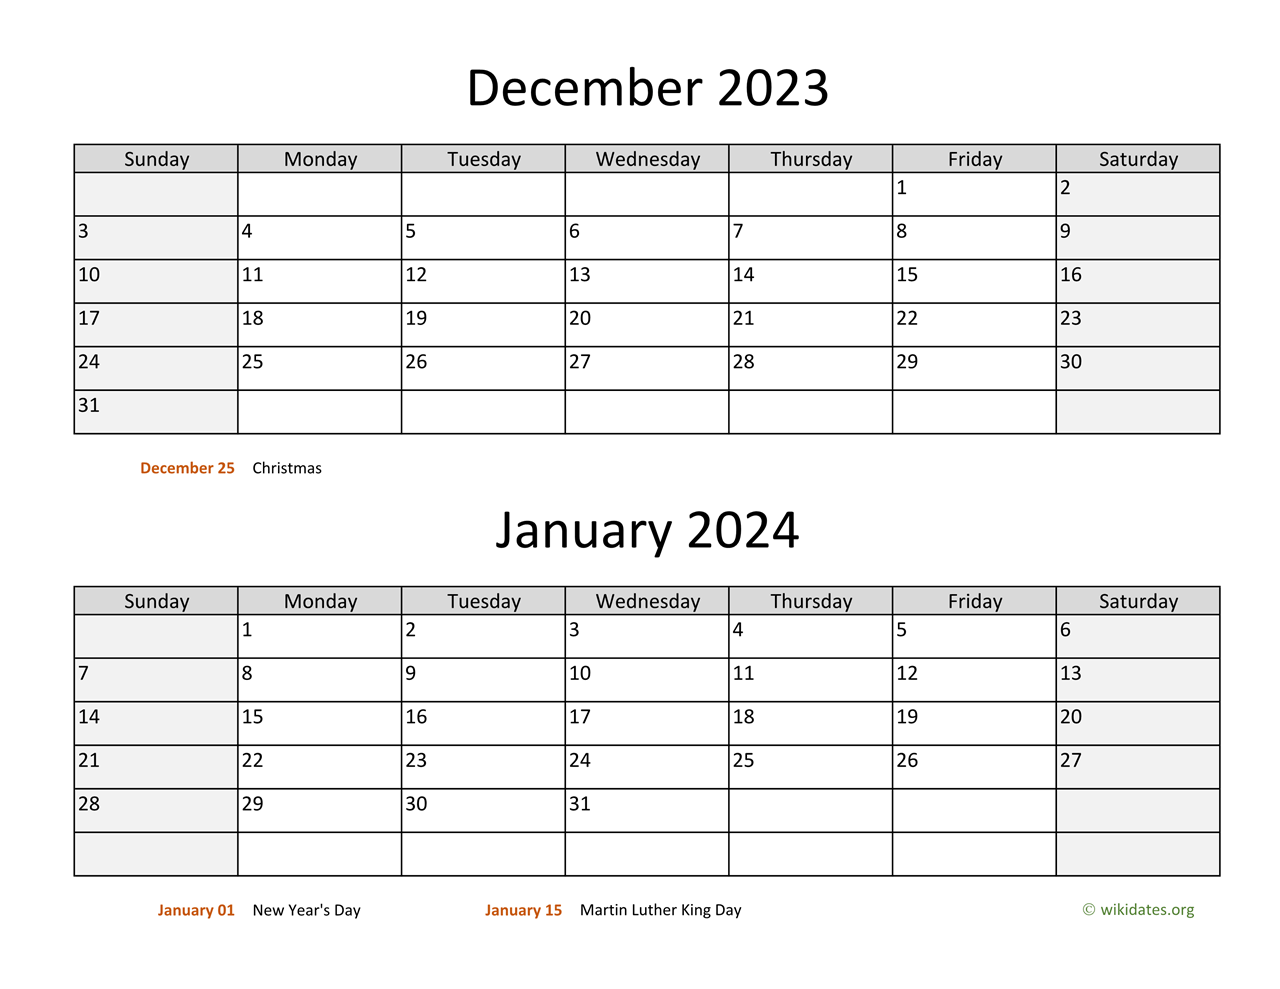 December 2023 And January 2024 Calendar | Wikidates for Calendar December 2023 And January 2024 Printable